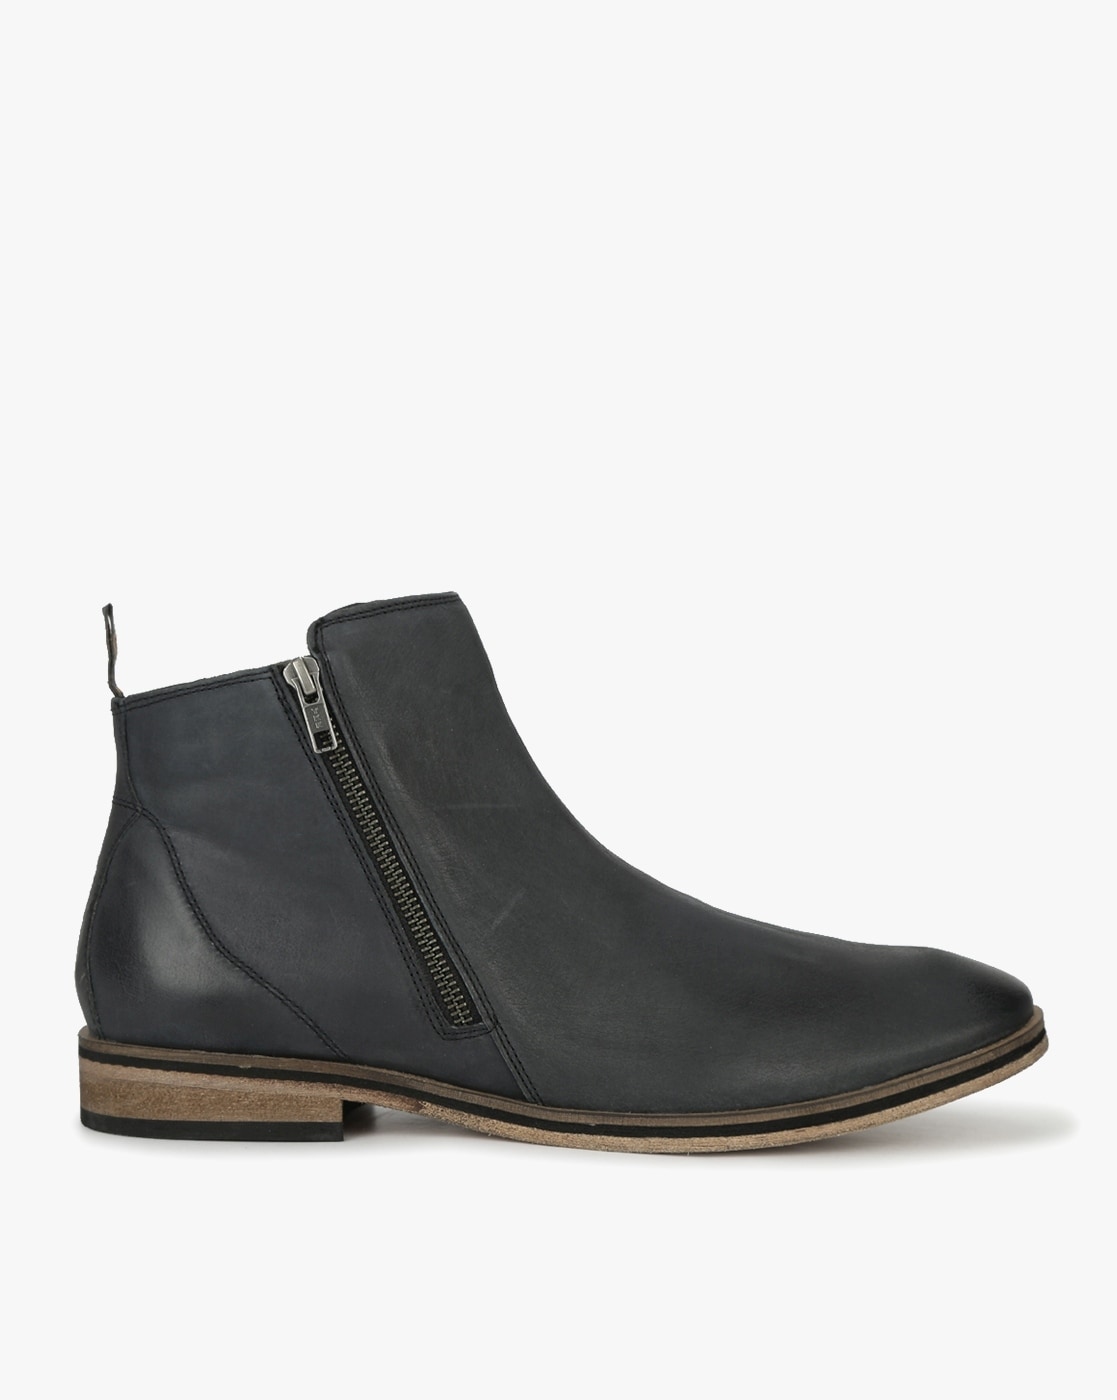 SUPERDRY Trenton Ankle Boots with Zip Closure